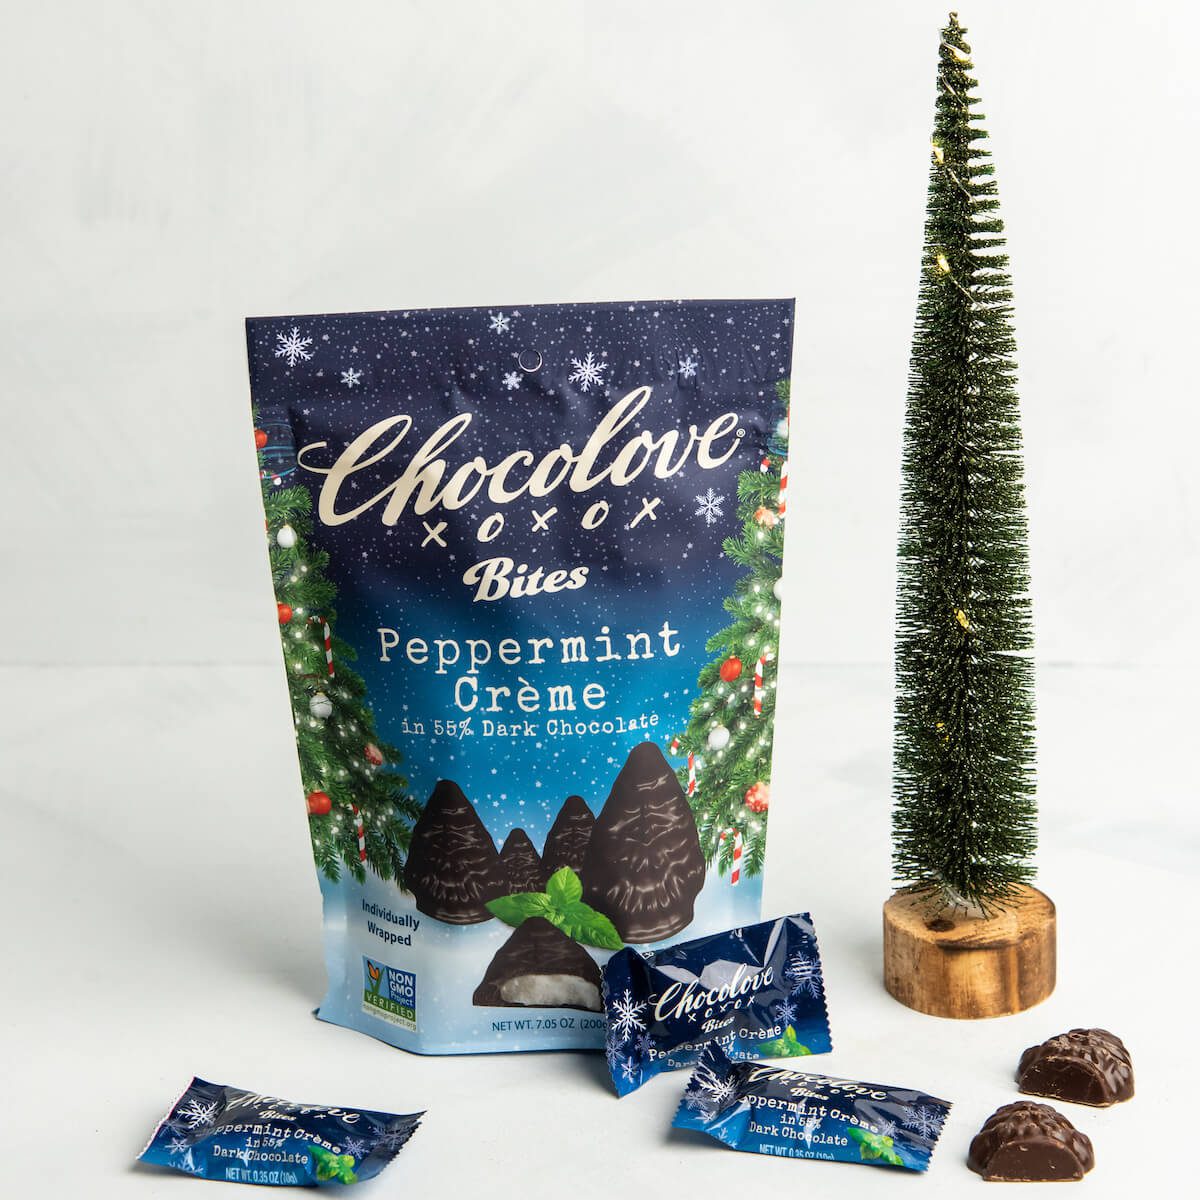 Chocolove peppermint creme tree bites with a product bag for gifts for people who like to cook.